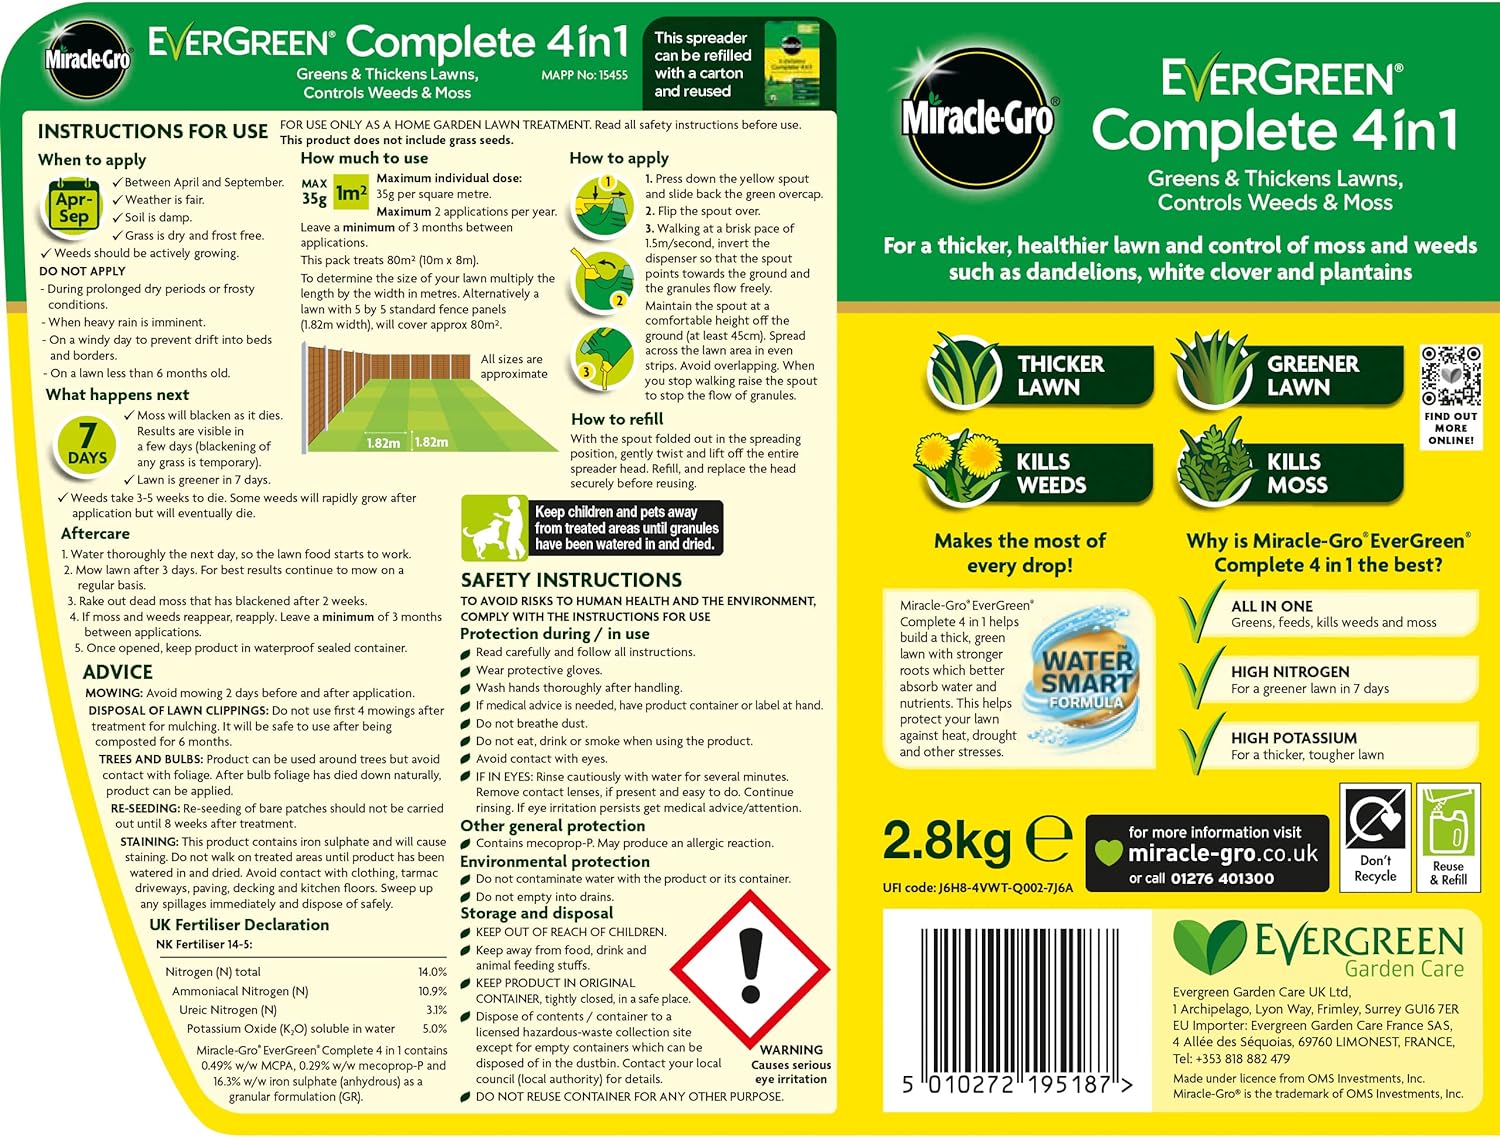 Miracle-Gro EverGreen Complete 4-in-1 SPREADER - 80m2